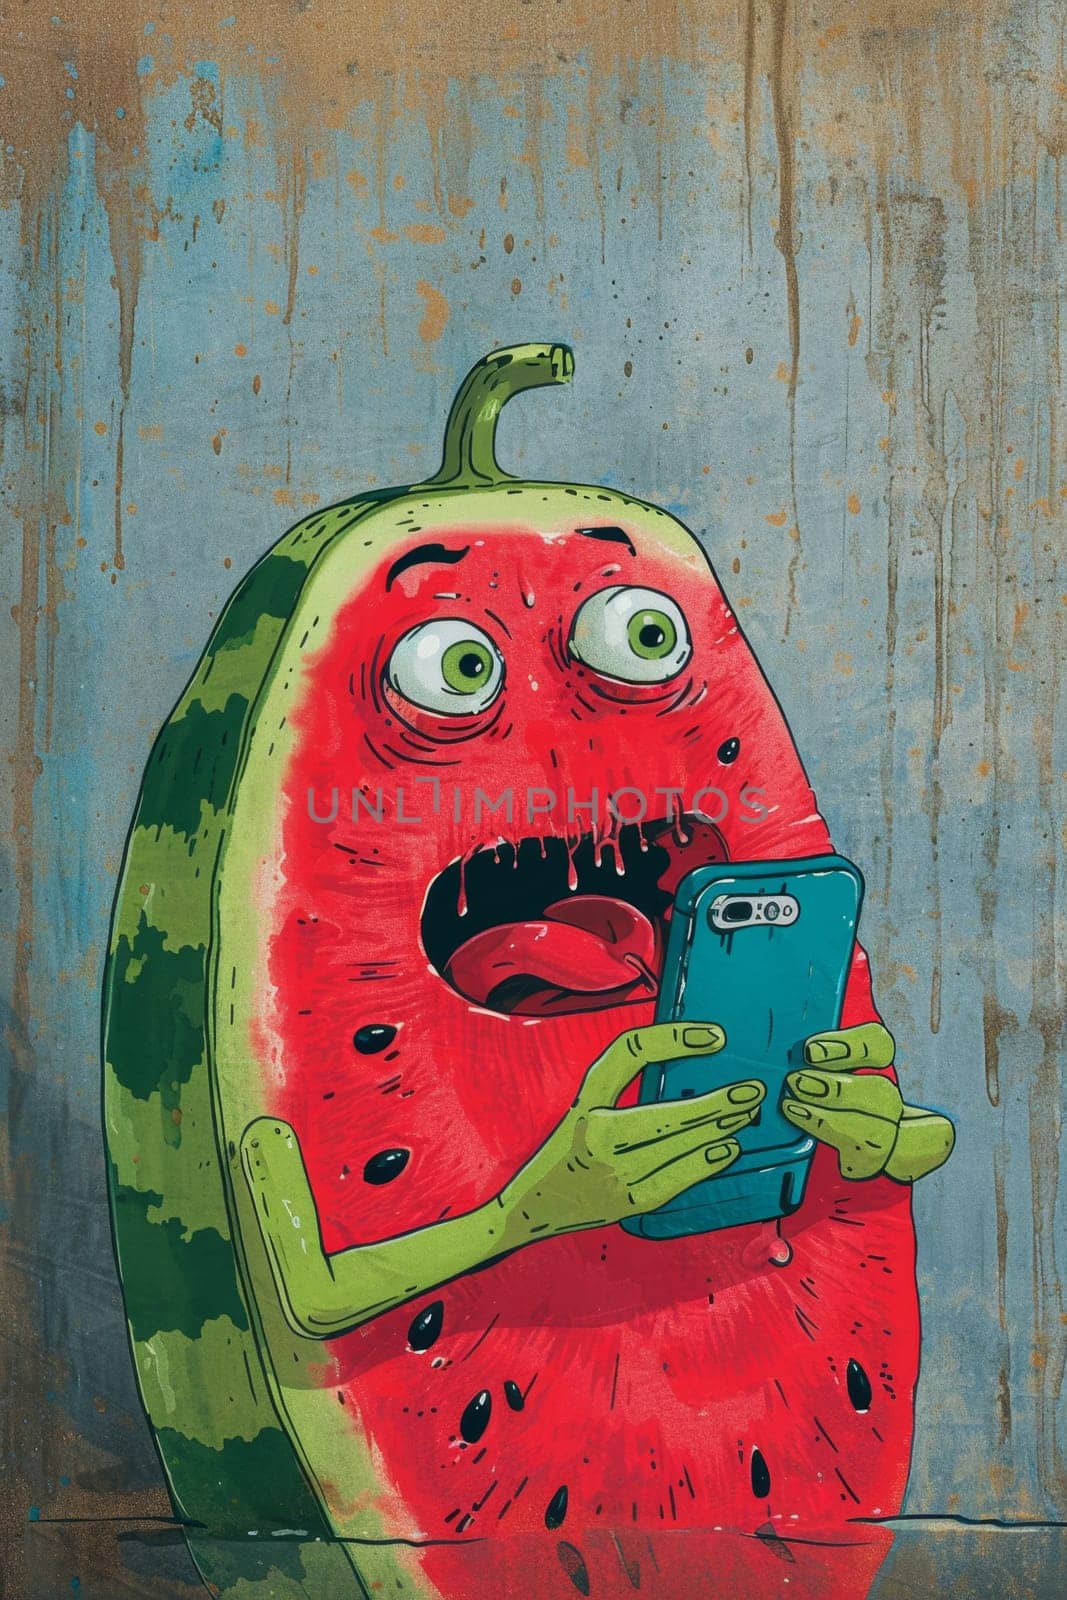 A surprised cartoon watermelon holds a smartphone in his hand, looks at the phone in surprise. Illustration.